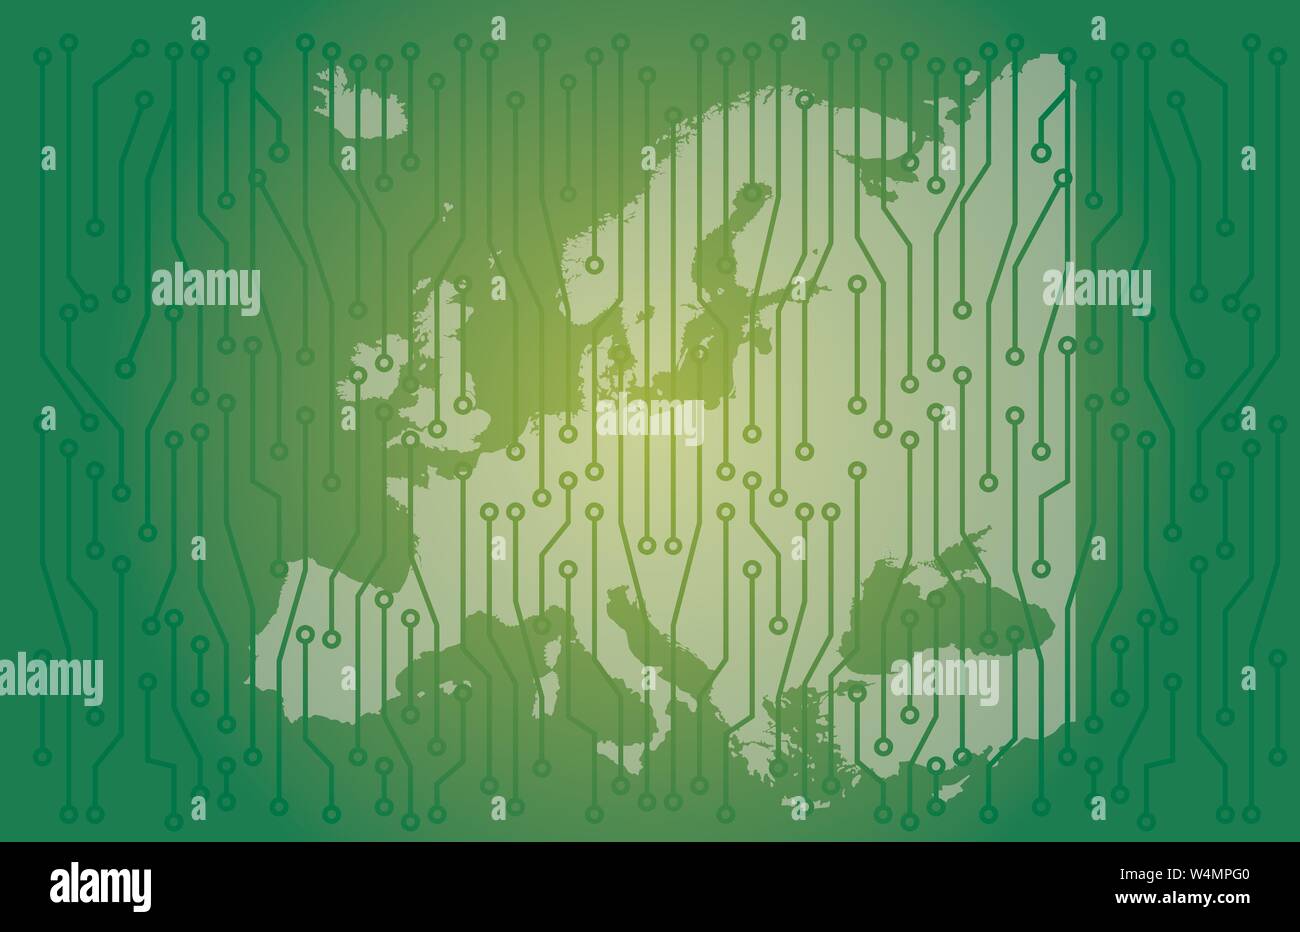 europe map circuit board concept background wallpaper. Stock Vector